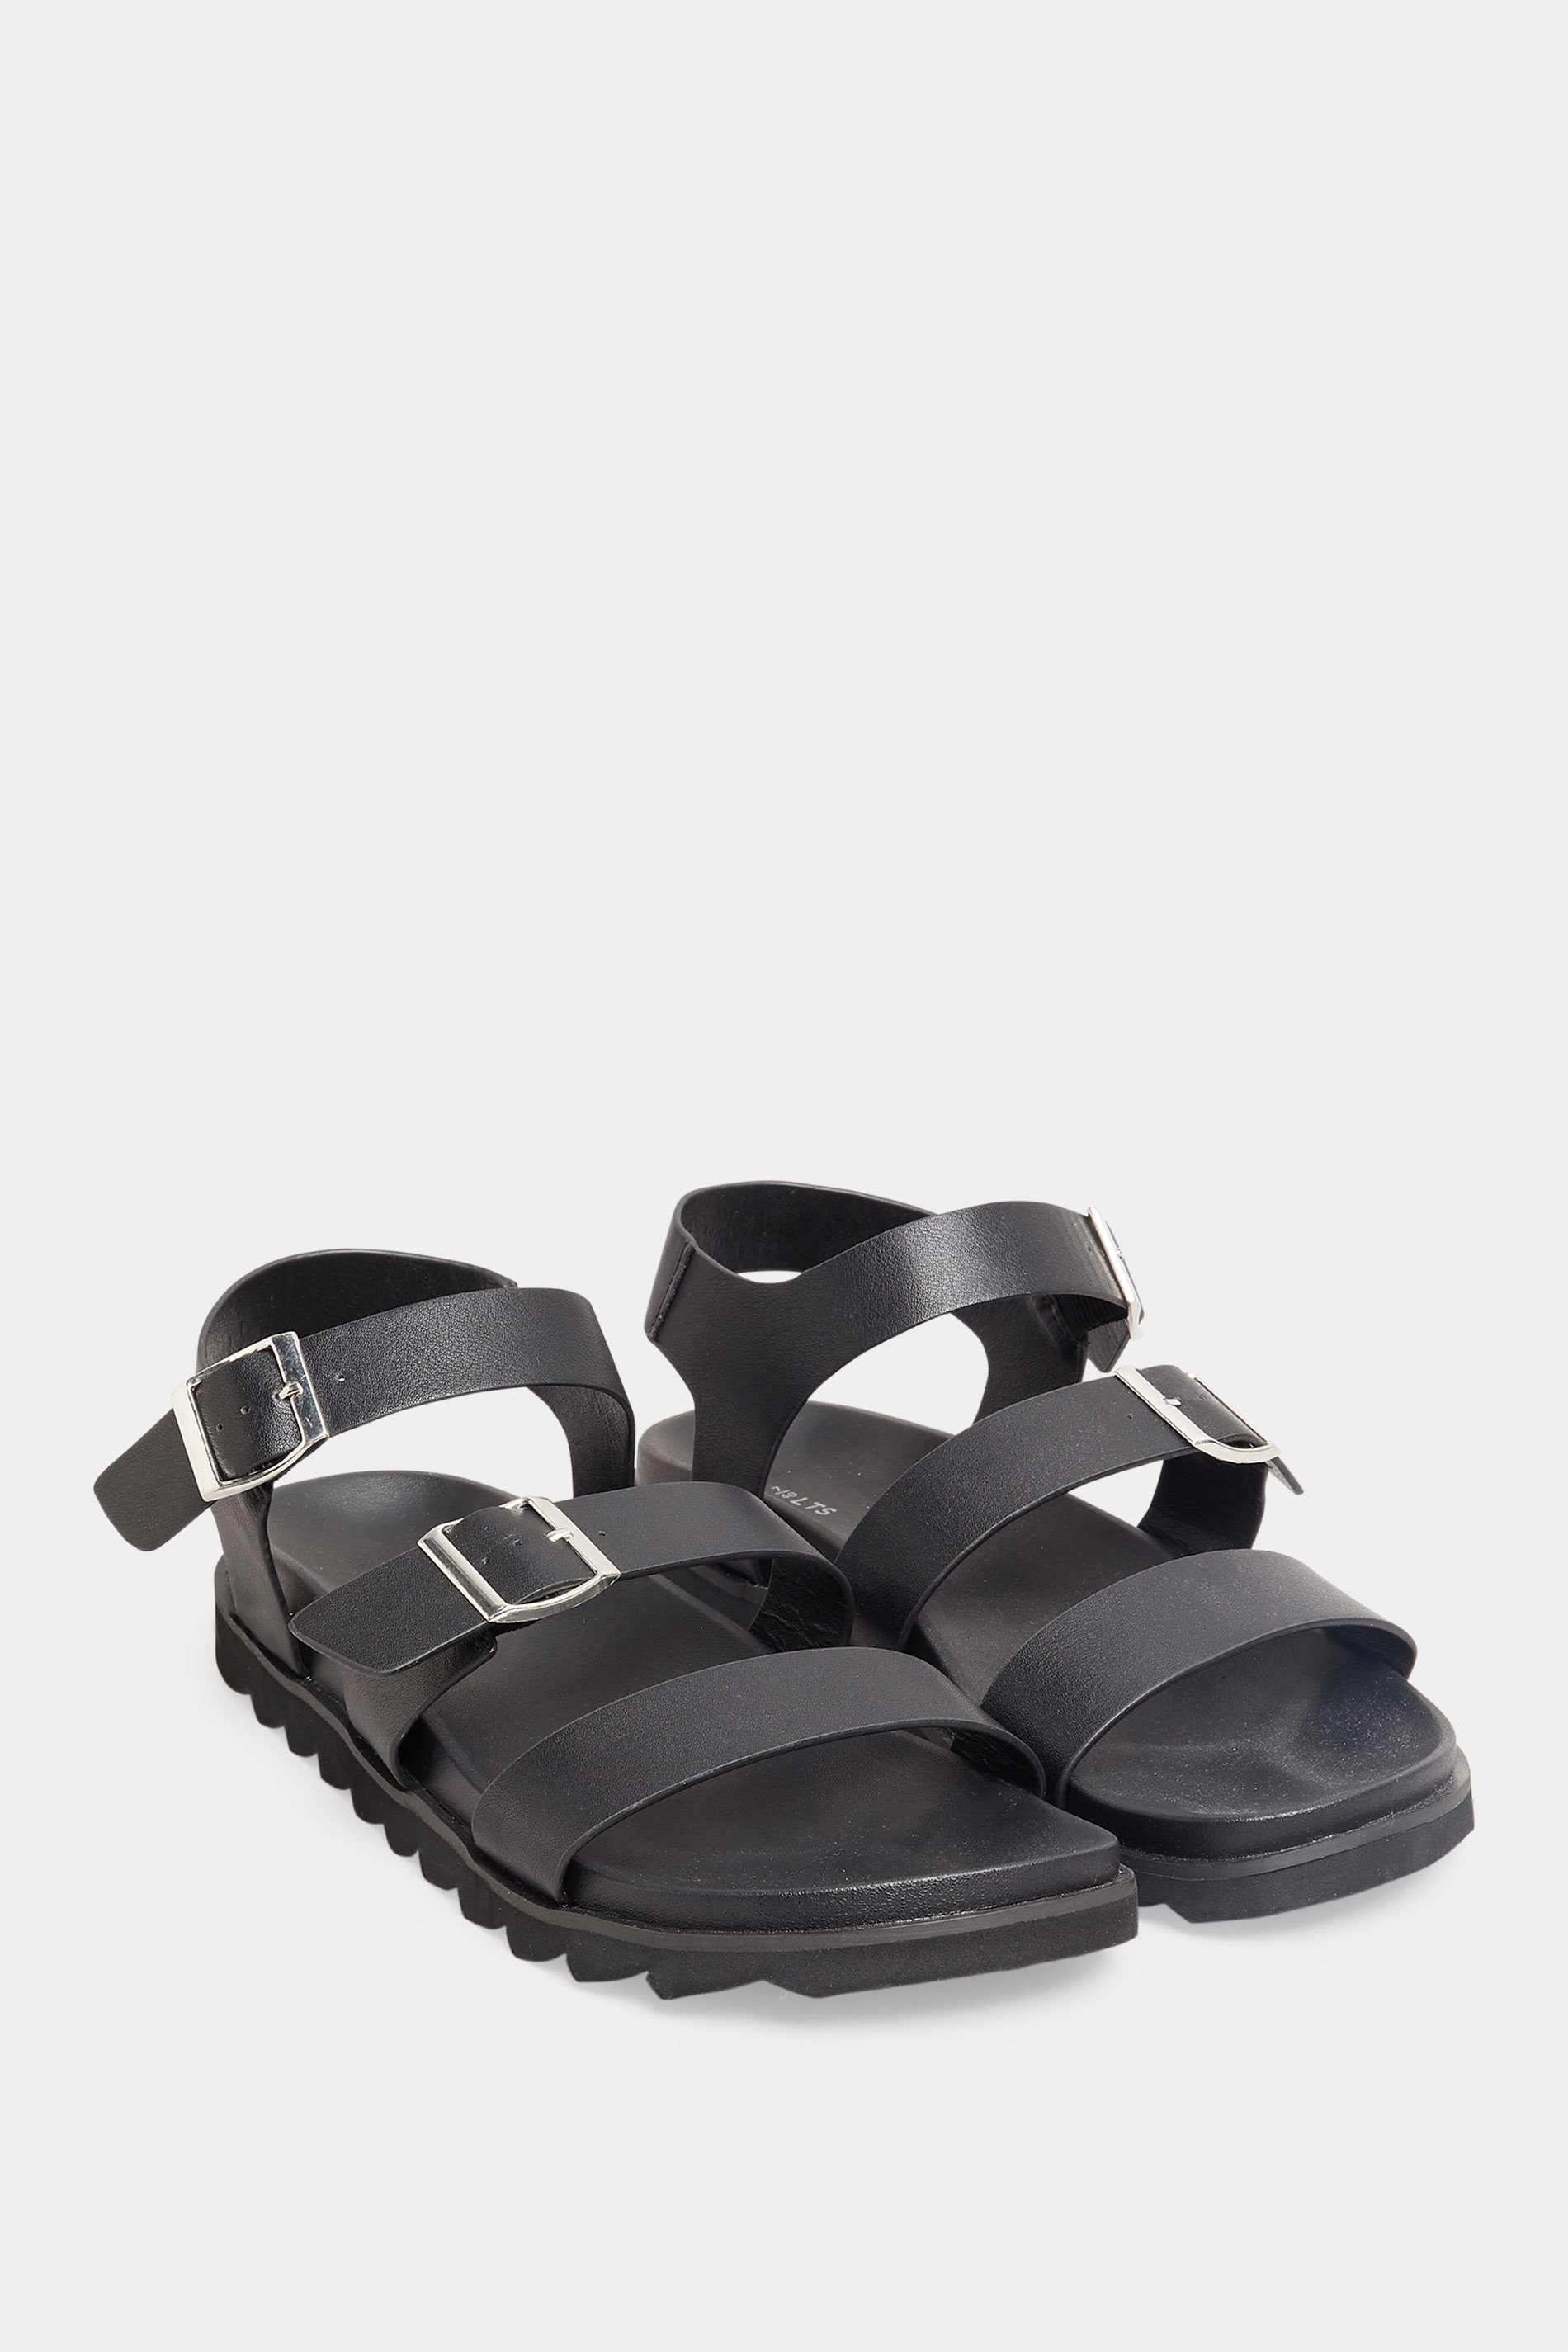 LTS Black Buckle Strap Sandals In Wide E Fit | Long Tall Sally 2